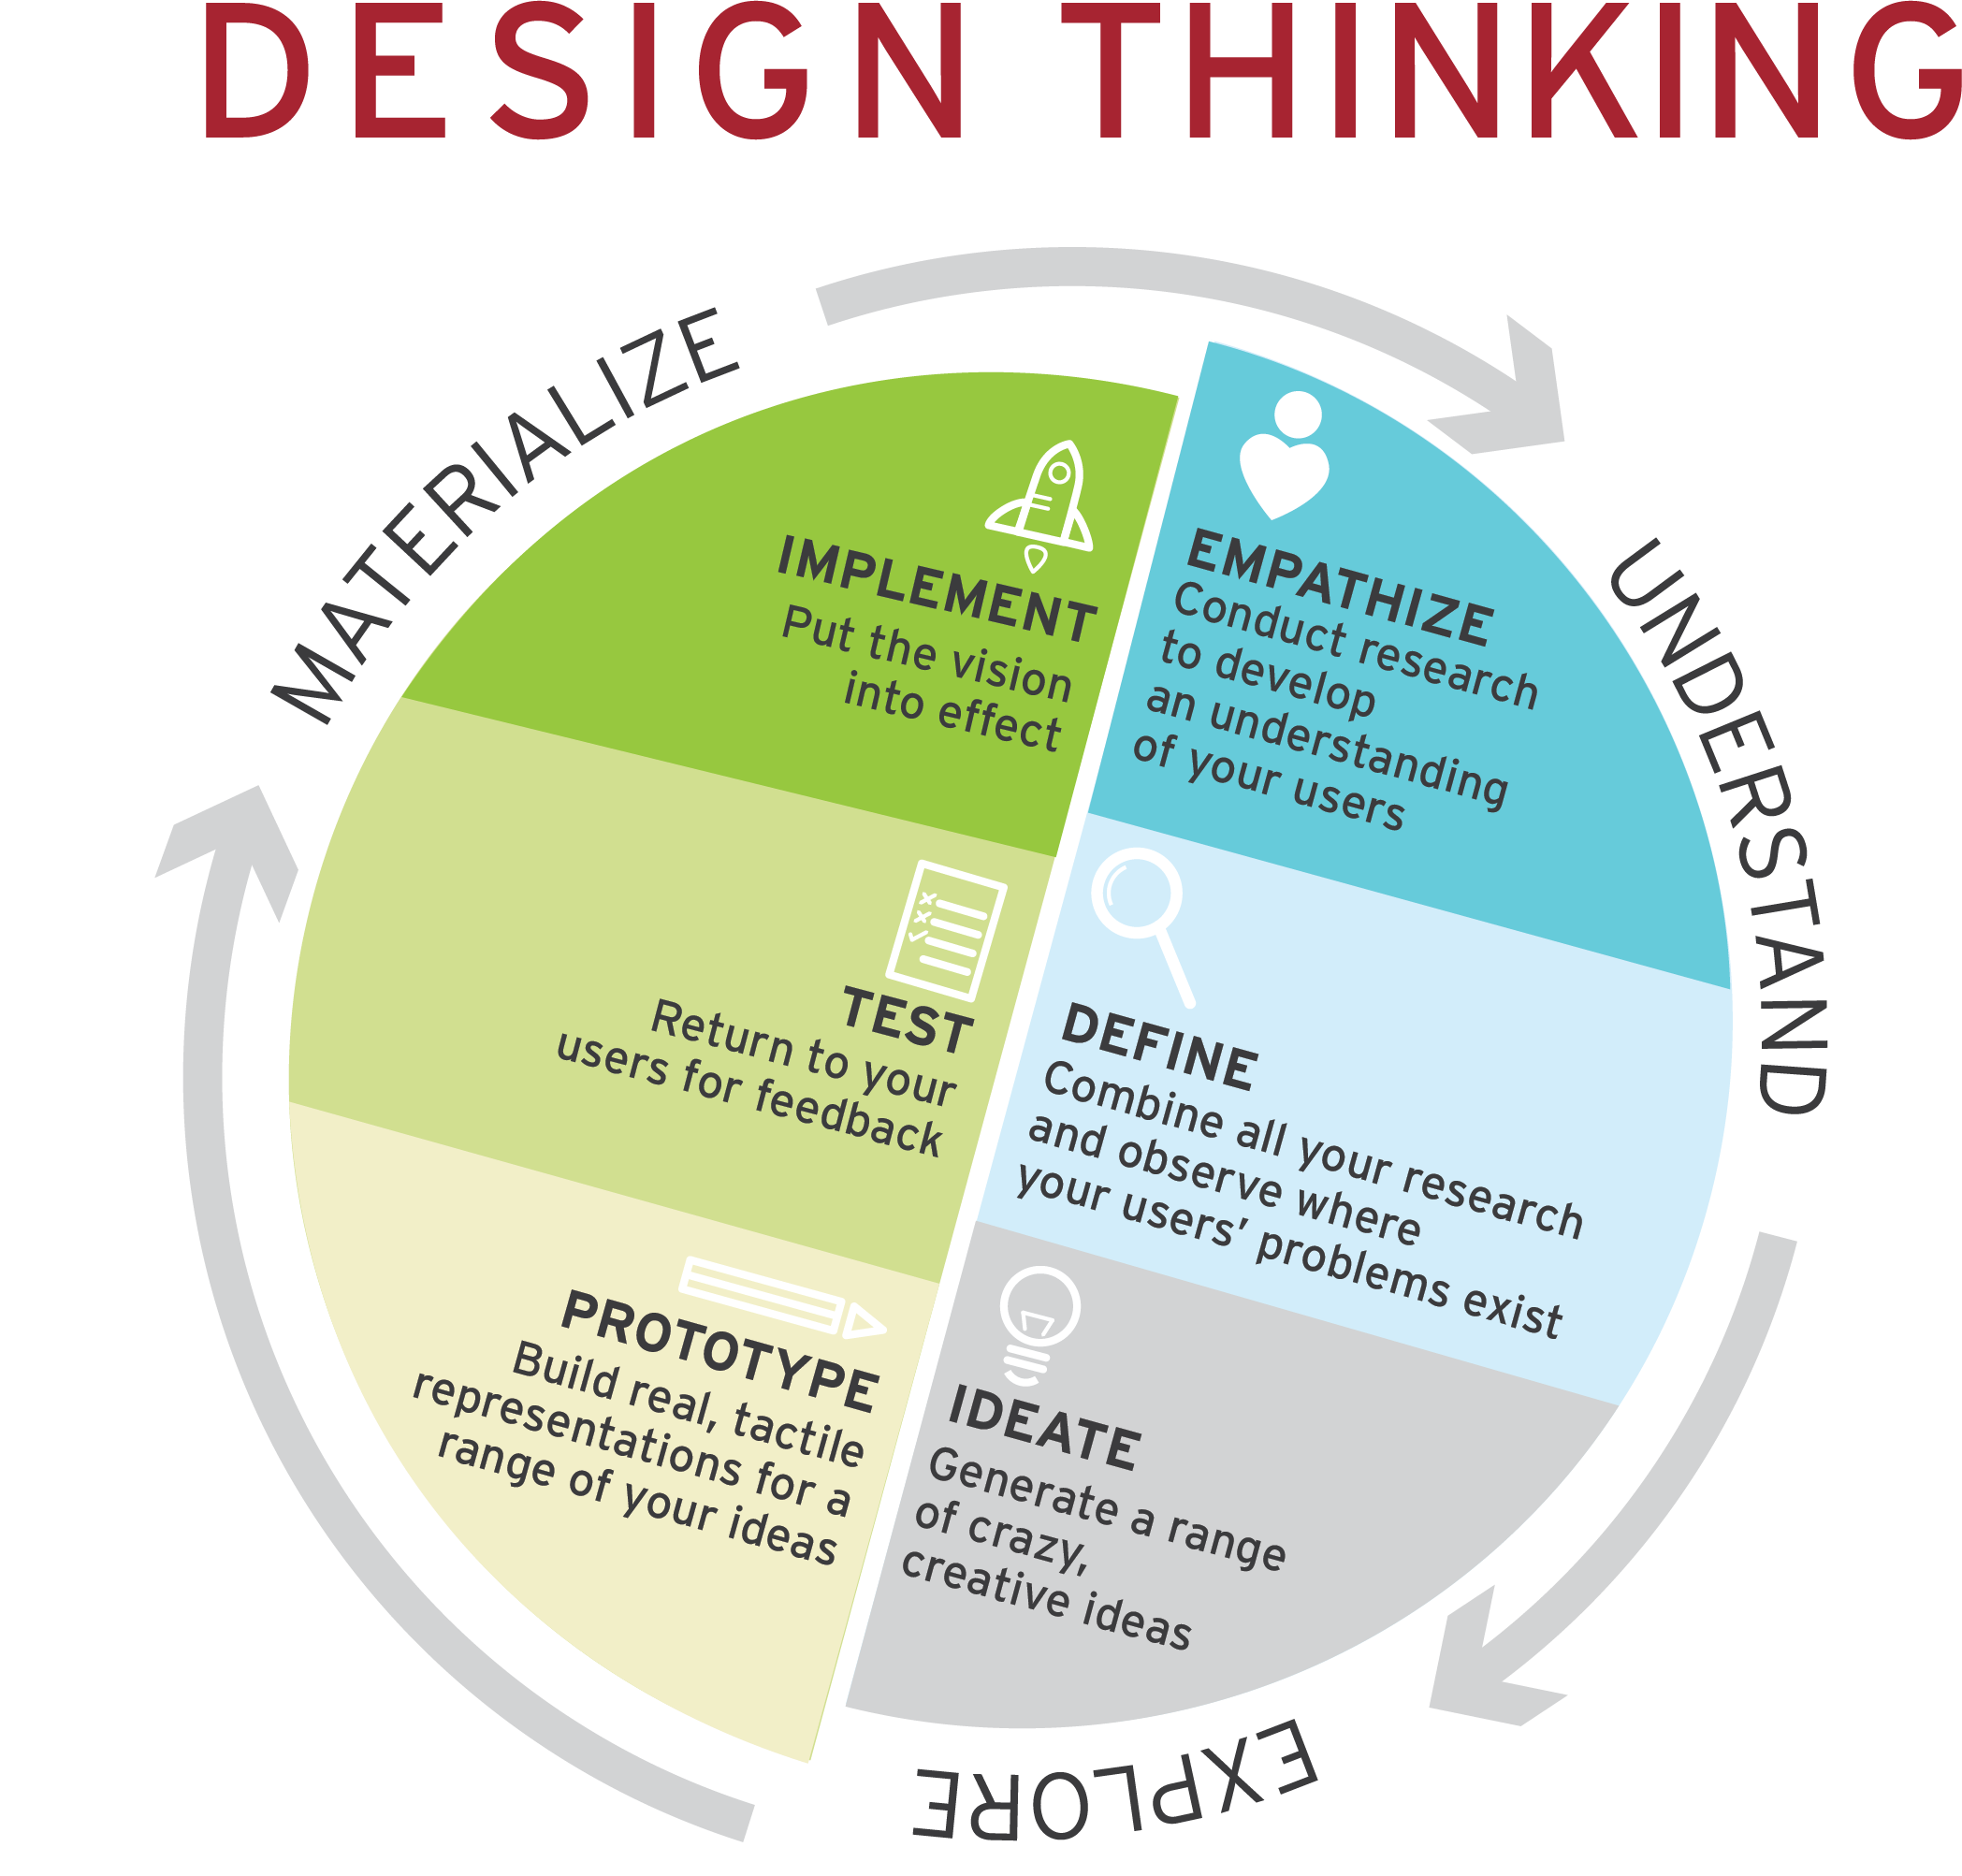 design thinking and its application to problem solving